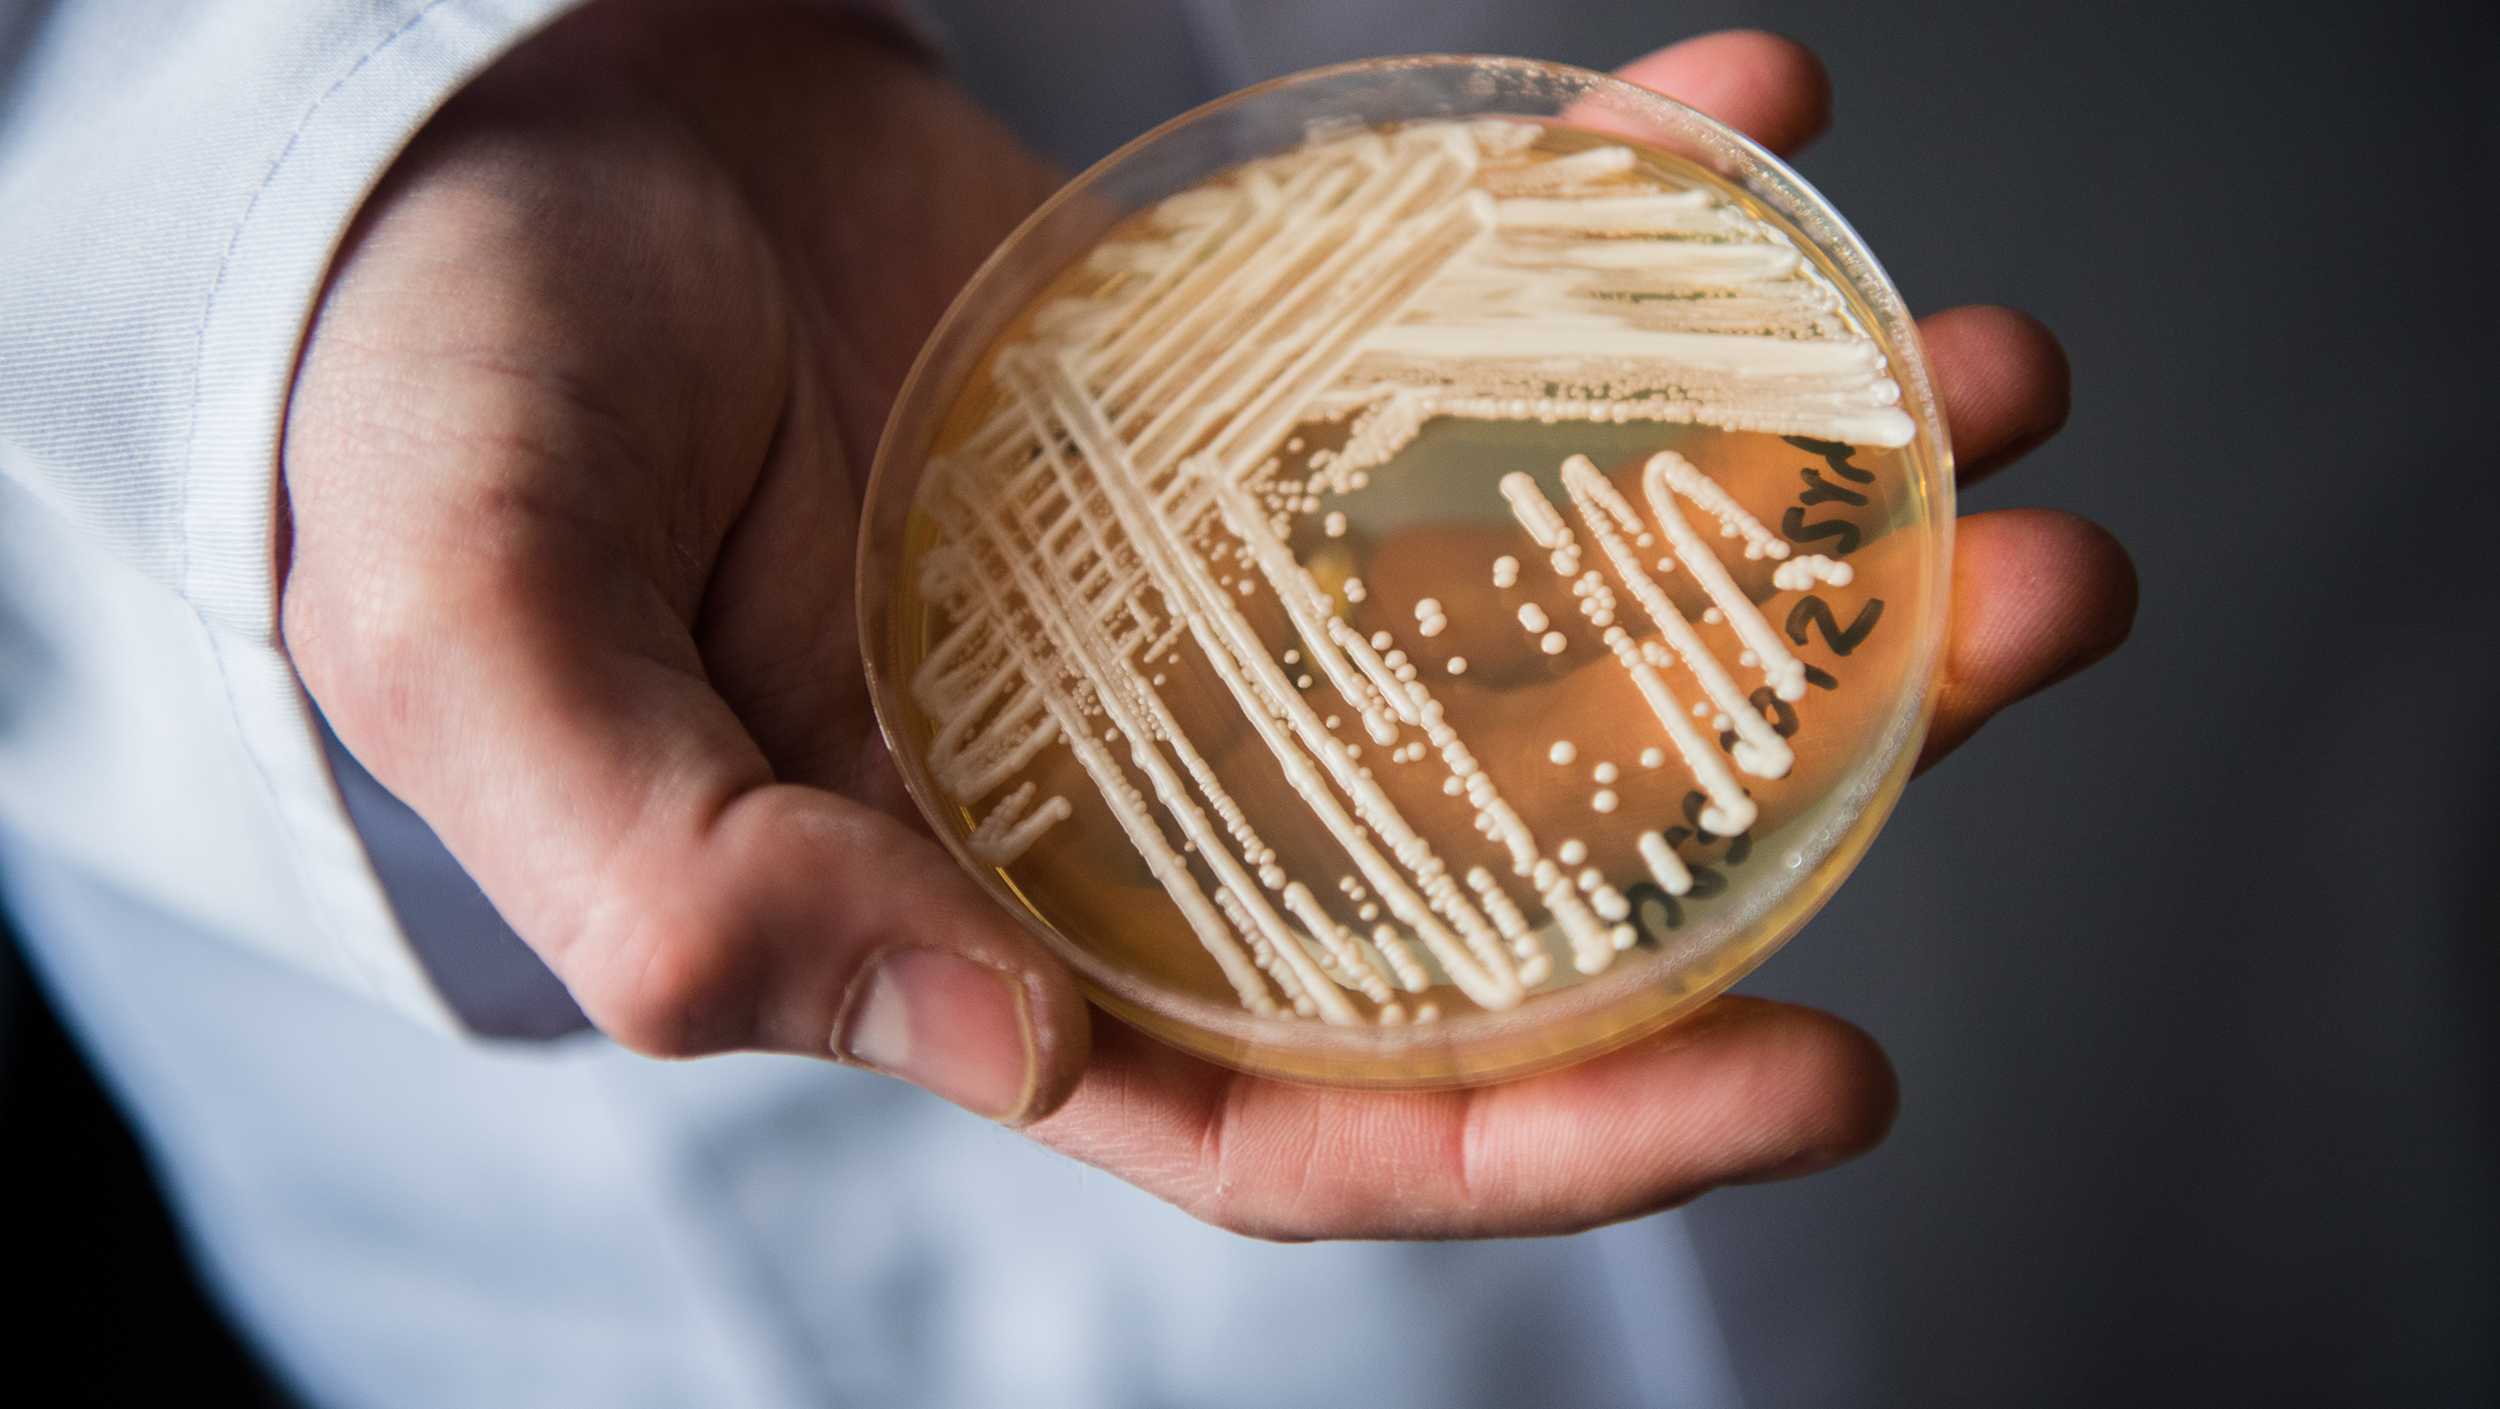 Fungal threat spread at an alarming rate in US health facilities